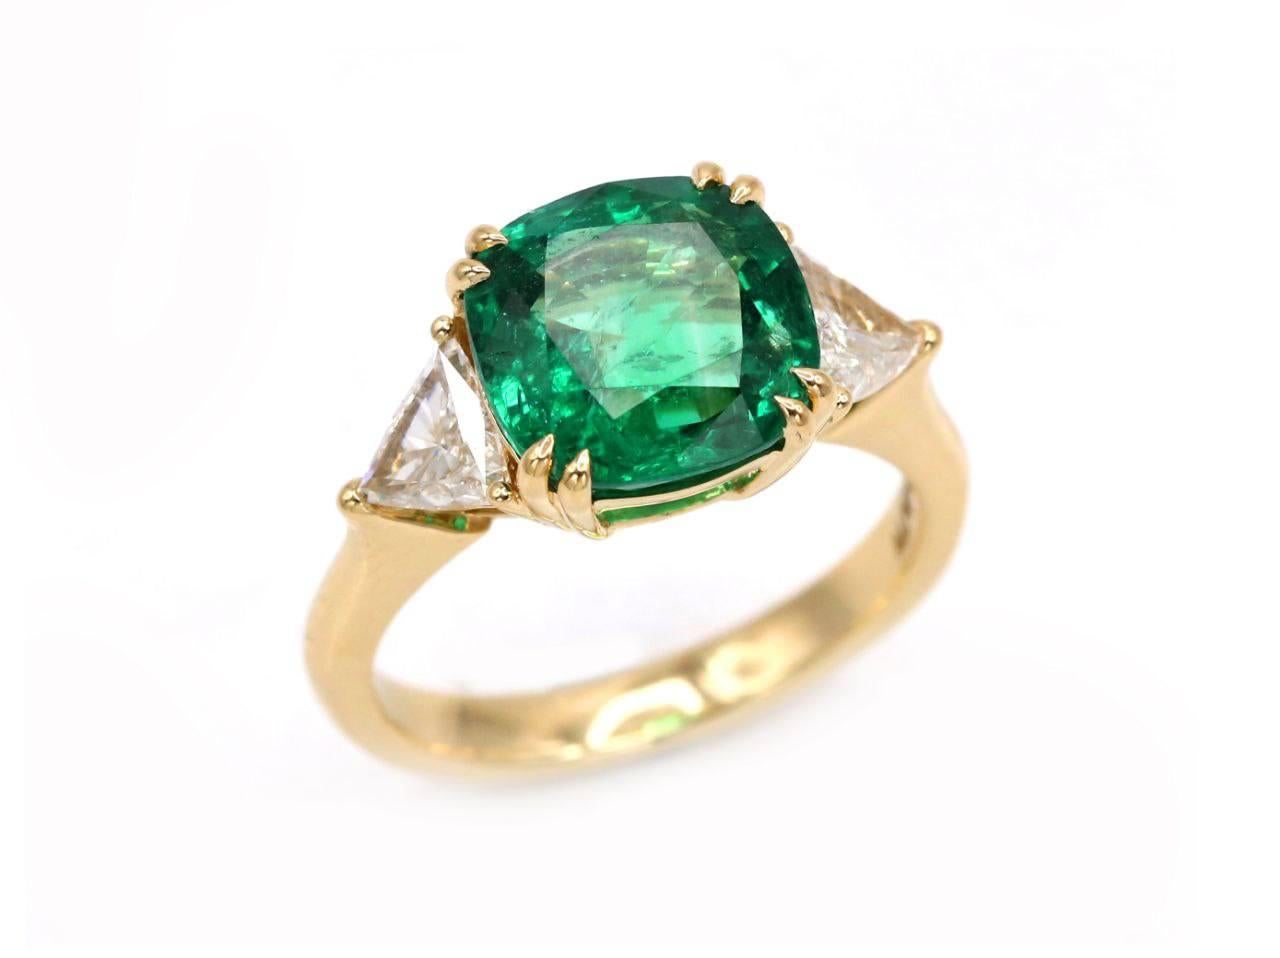 Emerald Cut Certified 4.19 Carat Emerald Diamond 18K Yellow Gold Cocktail Ring For Sale